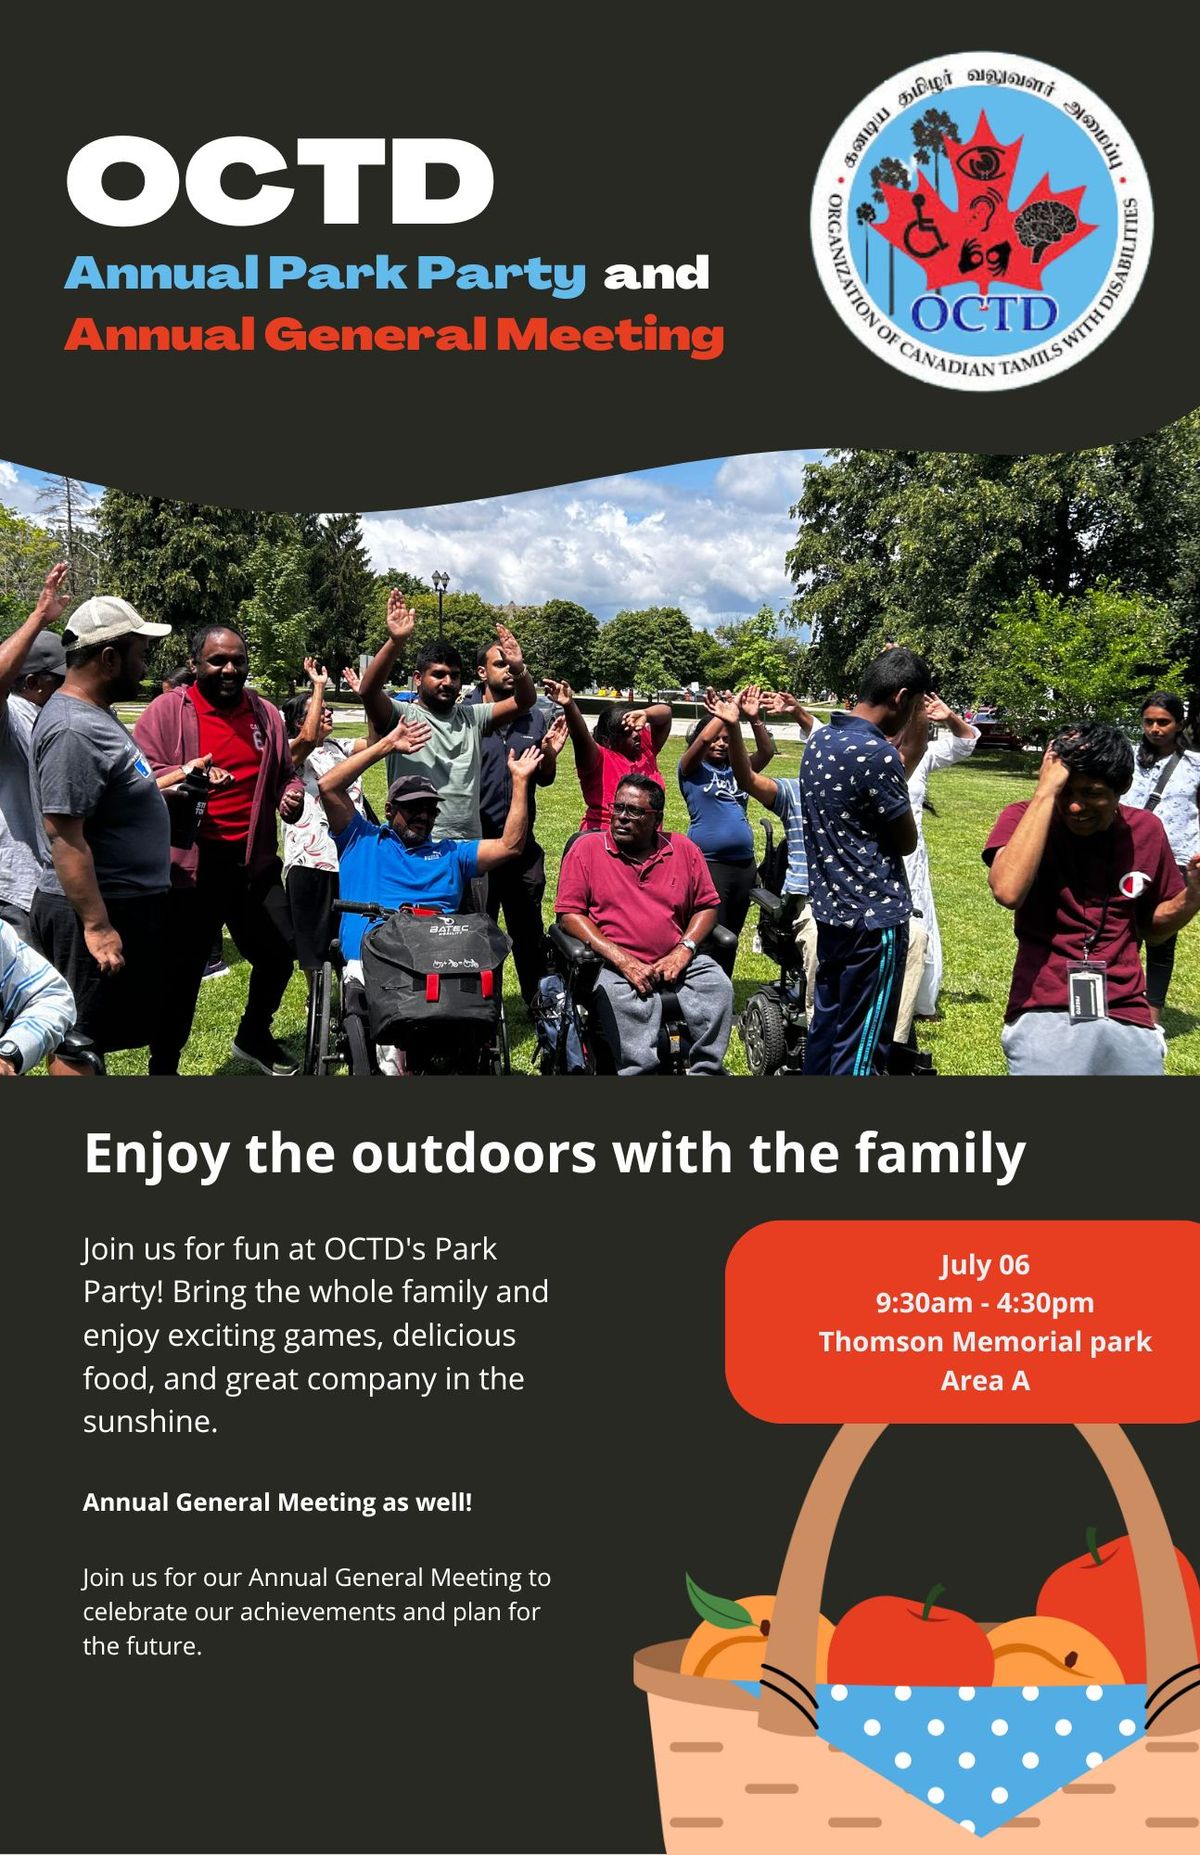 OCTD Park Party and Annual General Meeting